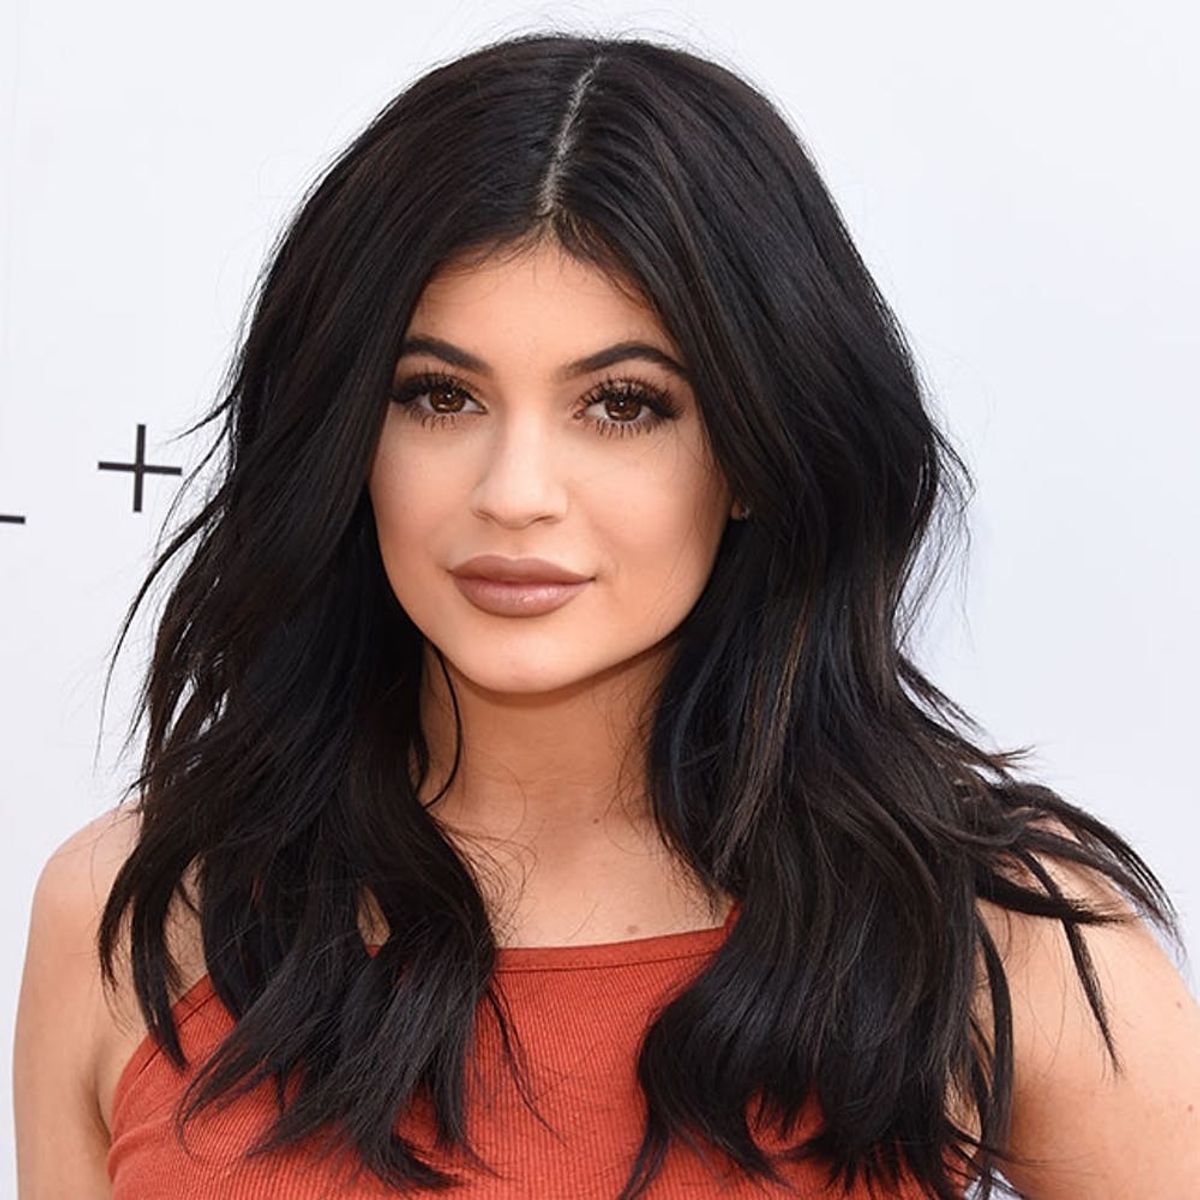 How to Copy Kylie Jenner’s Beauty Routine With ALL Drugstore Products